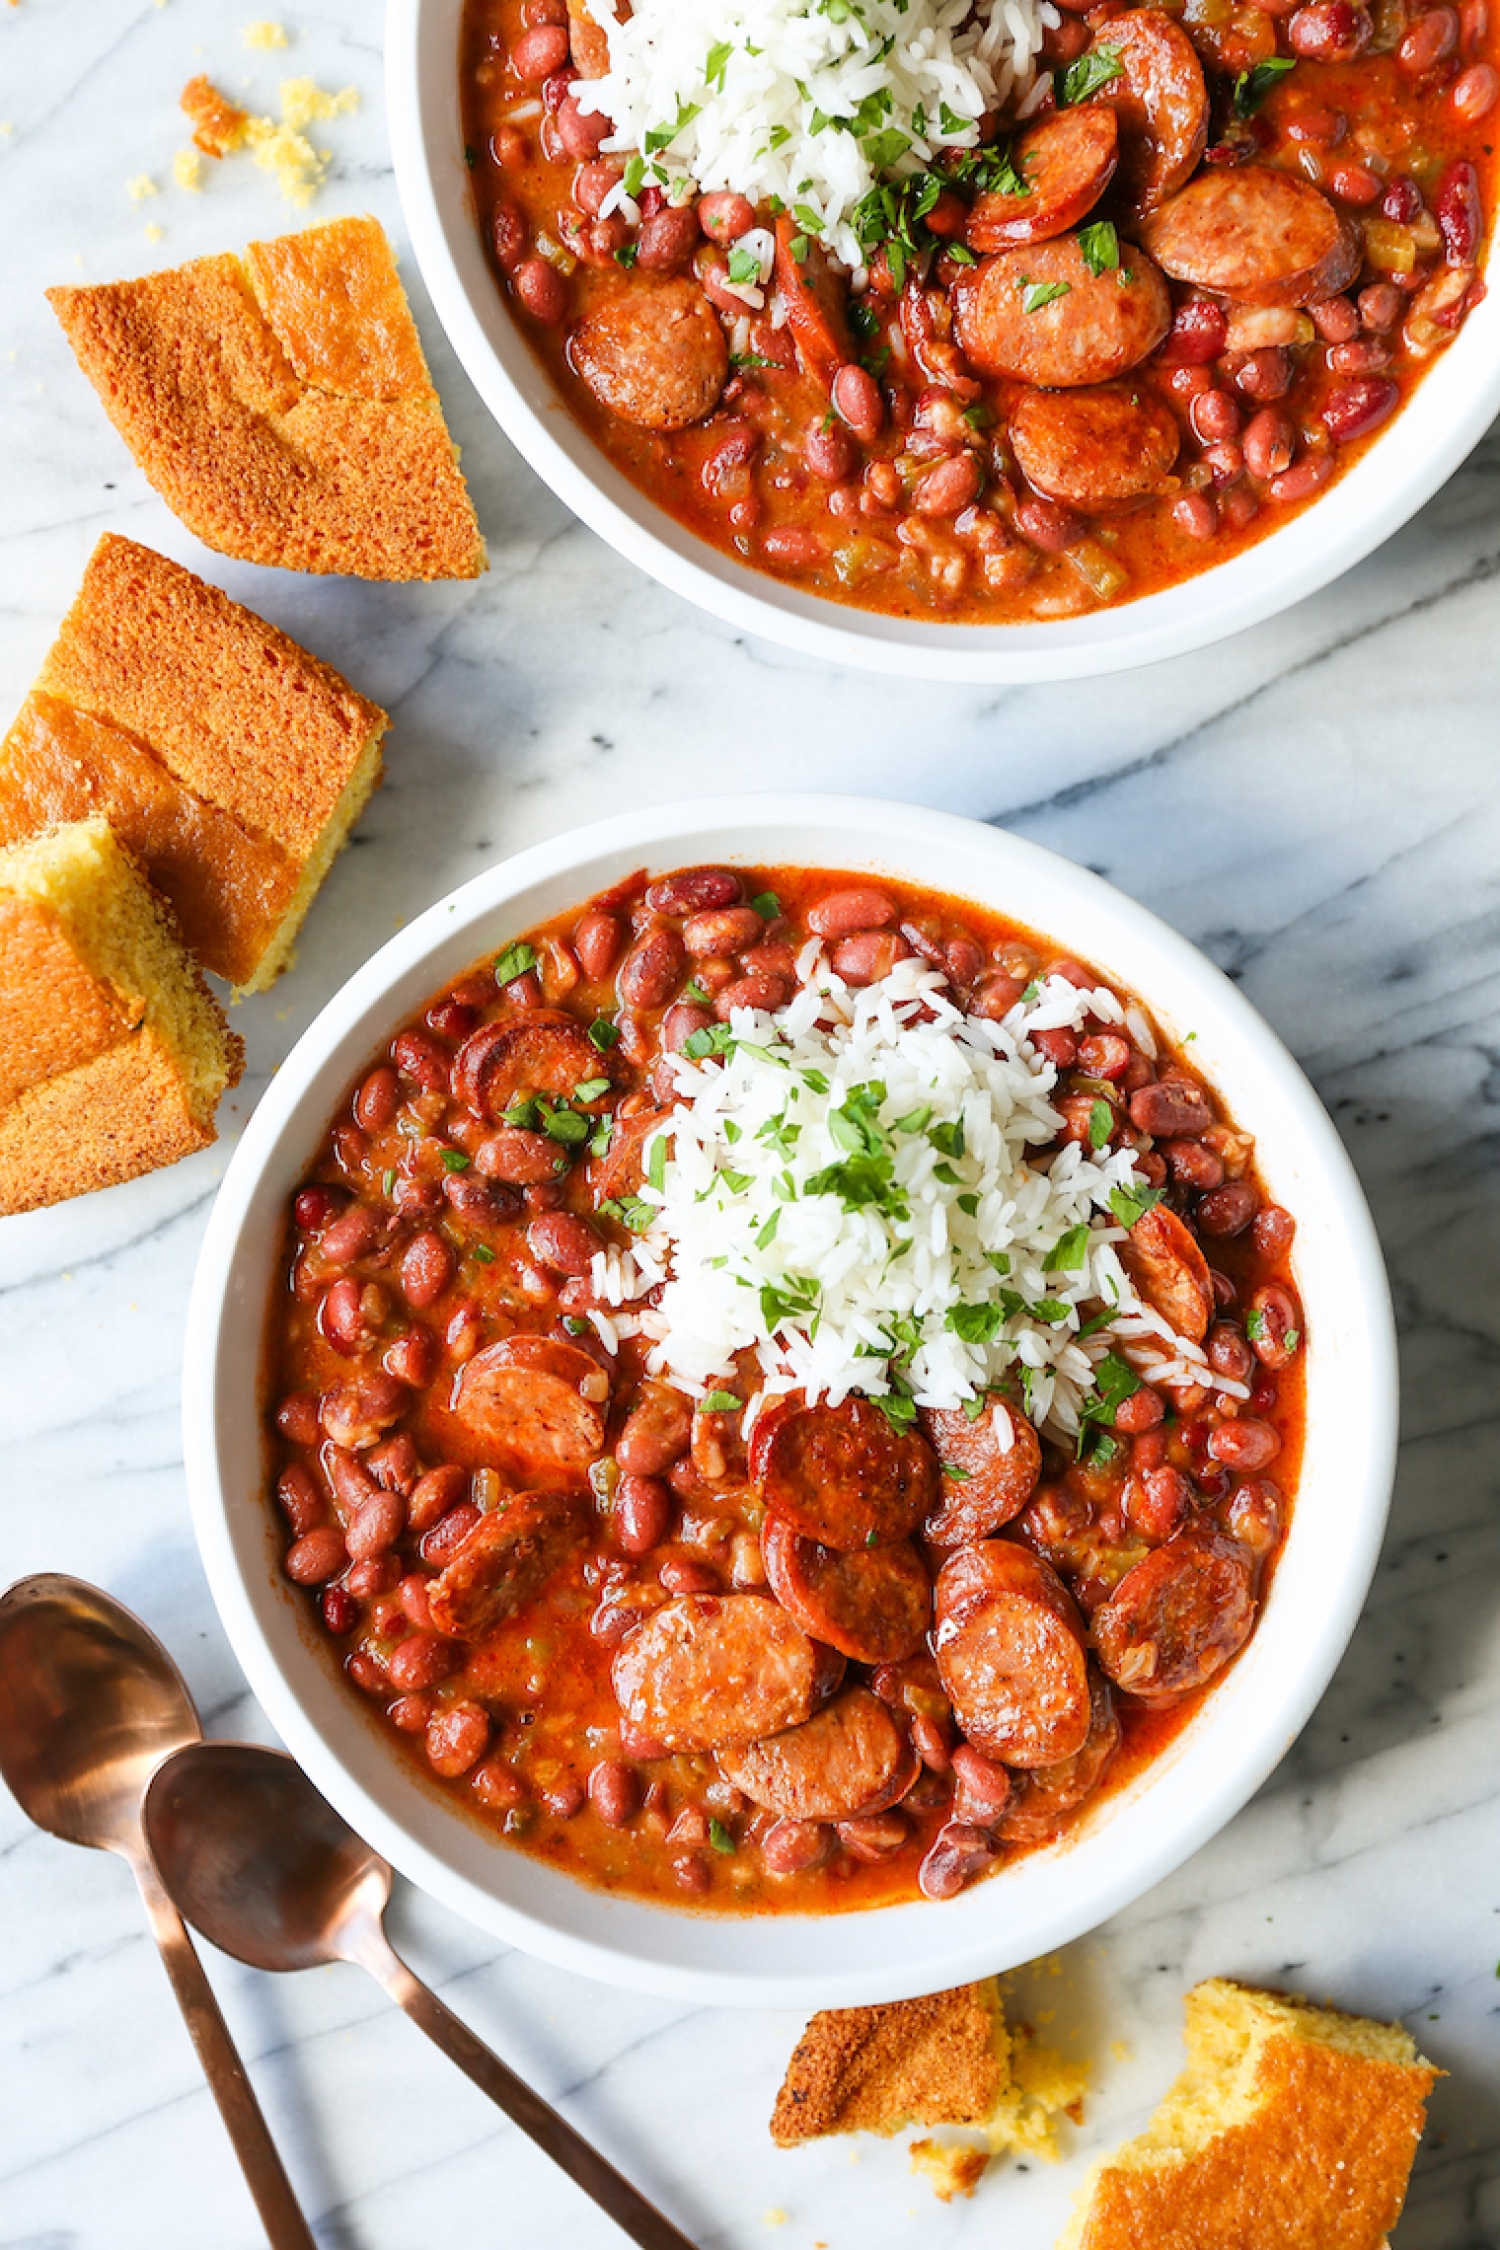 <p>Red beans and rice is a beloved classic Louisiana dish for a reason! It's smoky, spicy and oh-so-comforting. Plus, it's easy to make with canned beans, meaning prep time is kept to an absolute minimum. <a href="https://damndelicious.net/2019/04/15/red-beans-and-rice/" rel="noopener">Get the recipe here.</a></p>